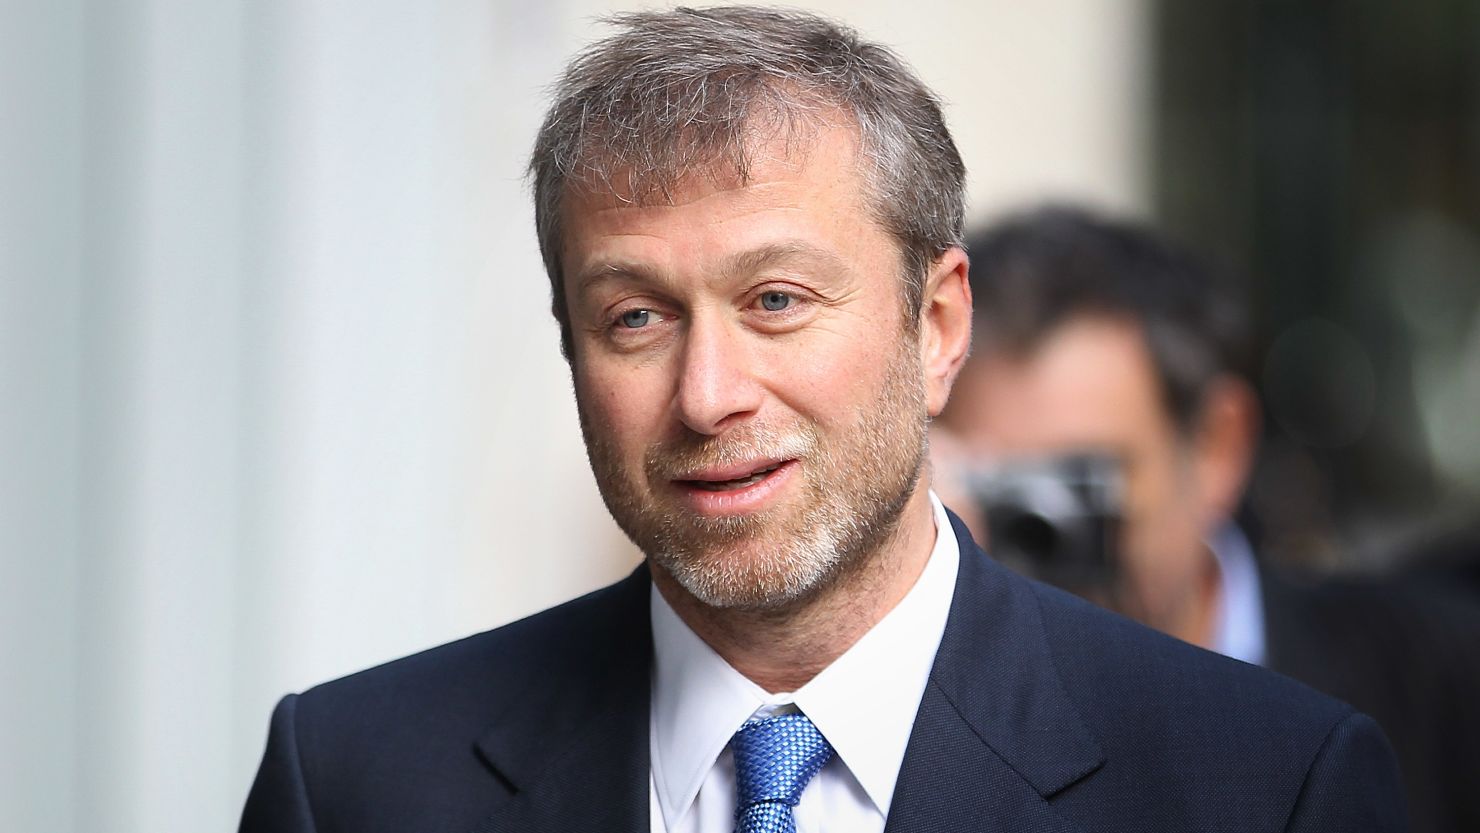 Chelsea owner Roman Abramovich has poured millions into the EPL club but they must now balance their books under FFP.